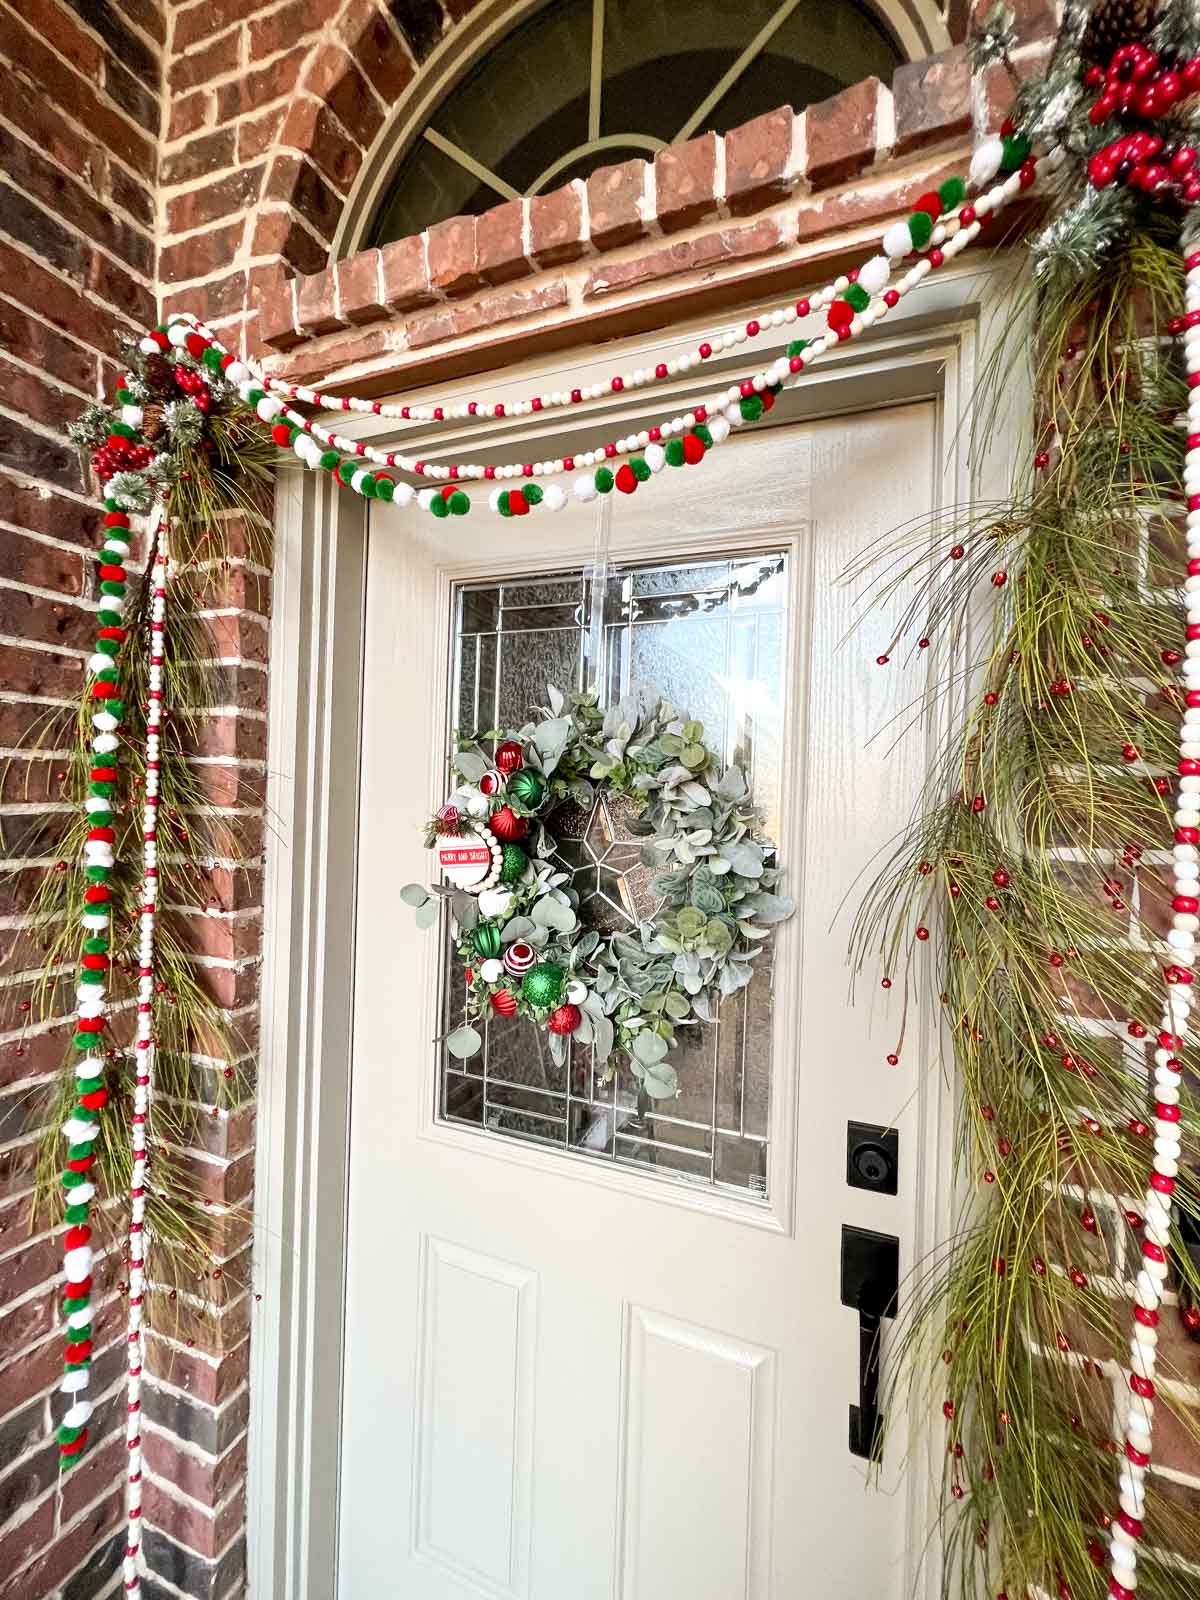 a holiday wreath on a tan front door with pom pom and wooden garlands among evergreen garlands.